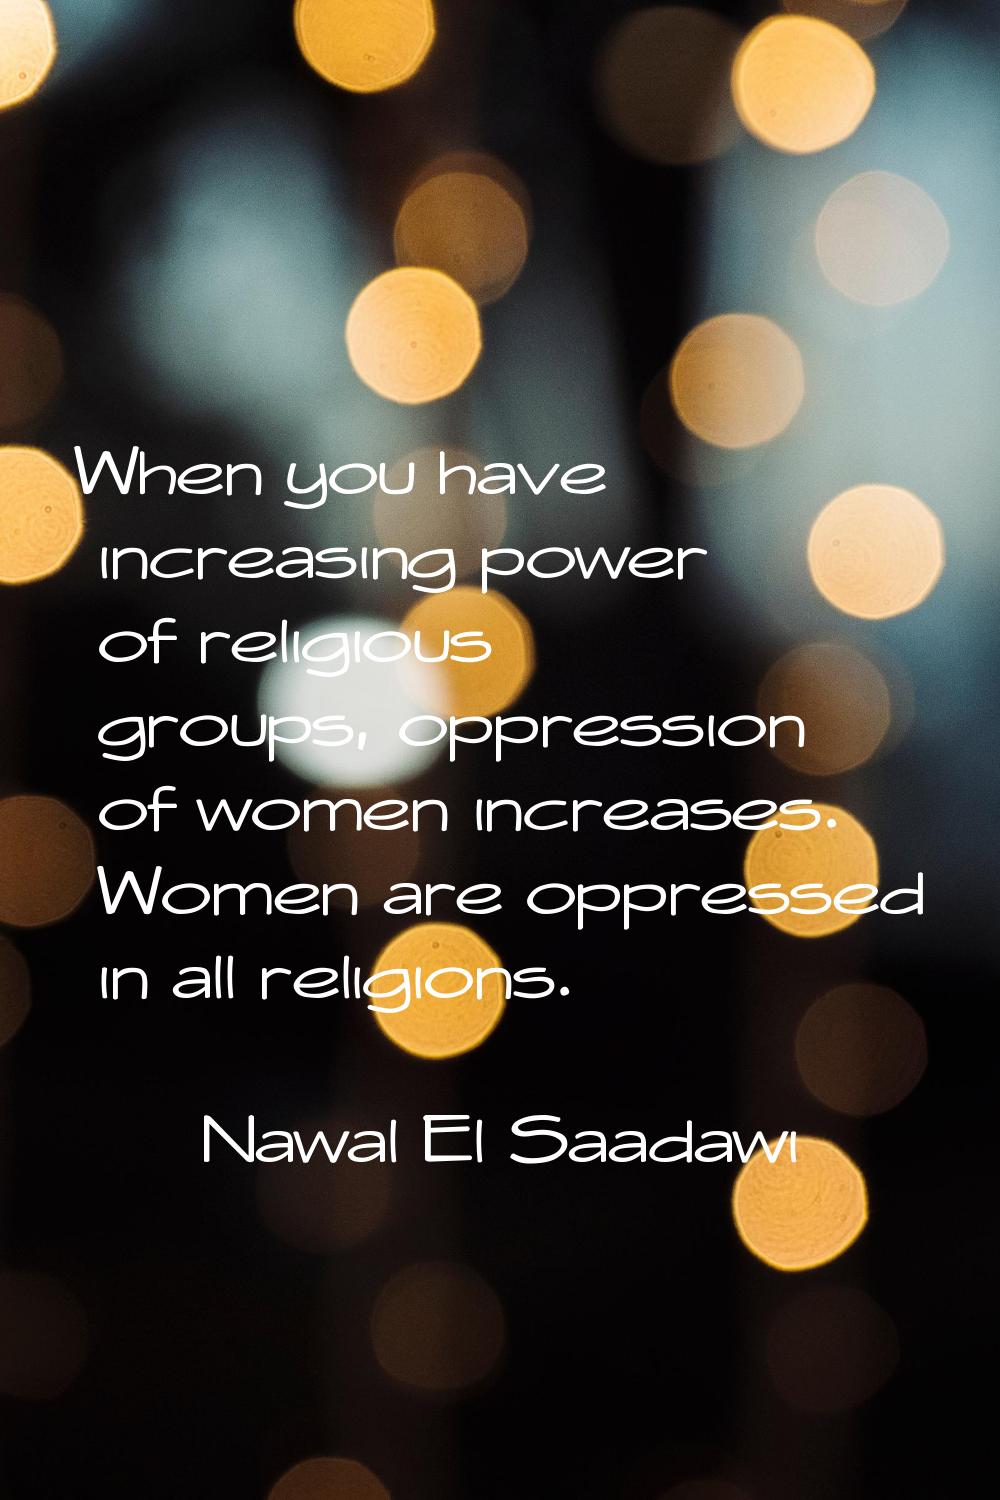 When you have increasing power of religious groups, oppression of women increases. Women are oppres